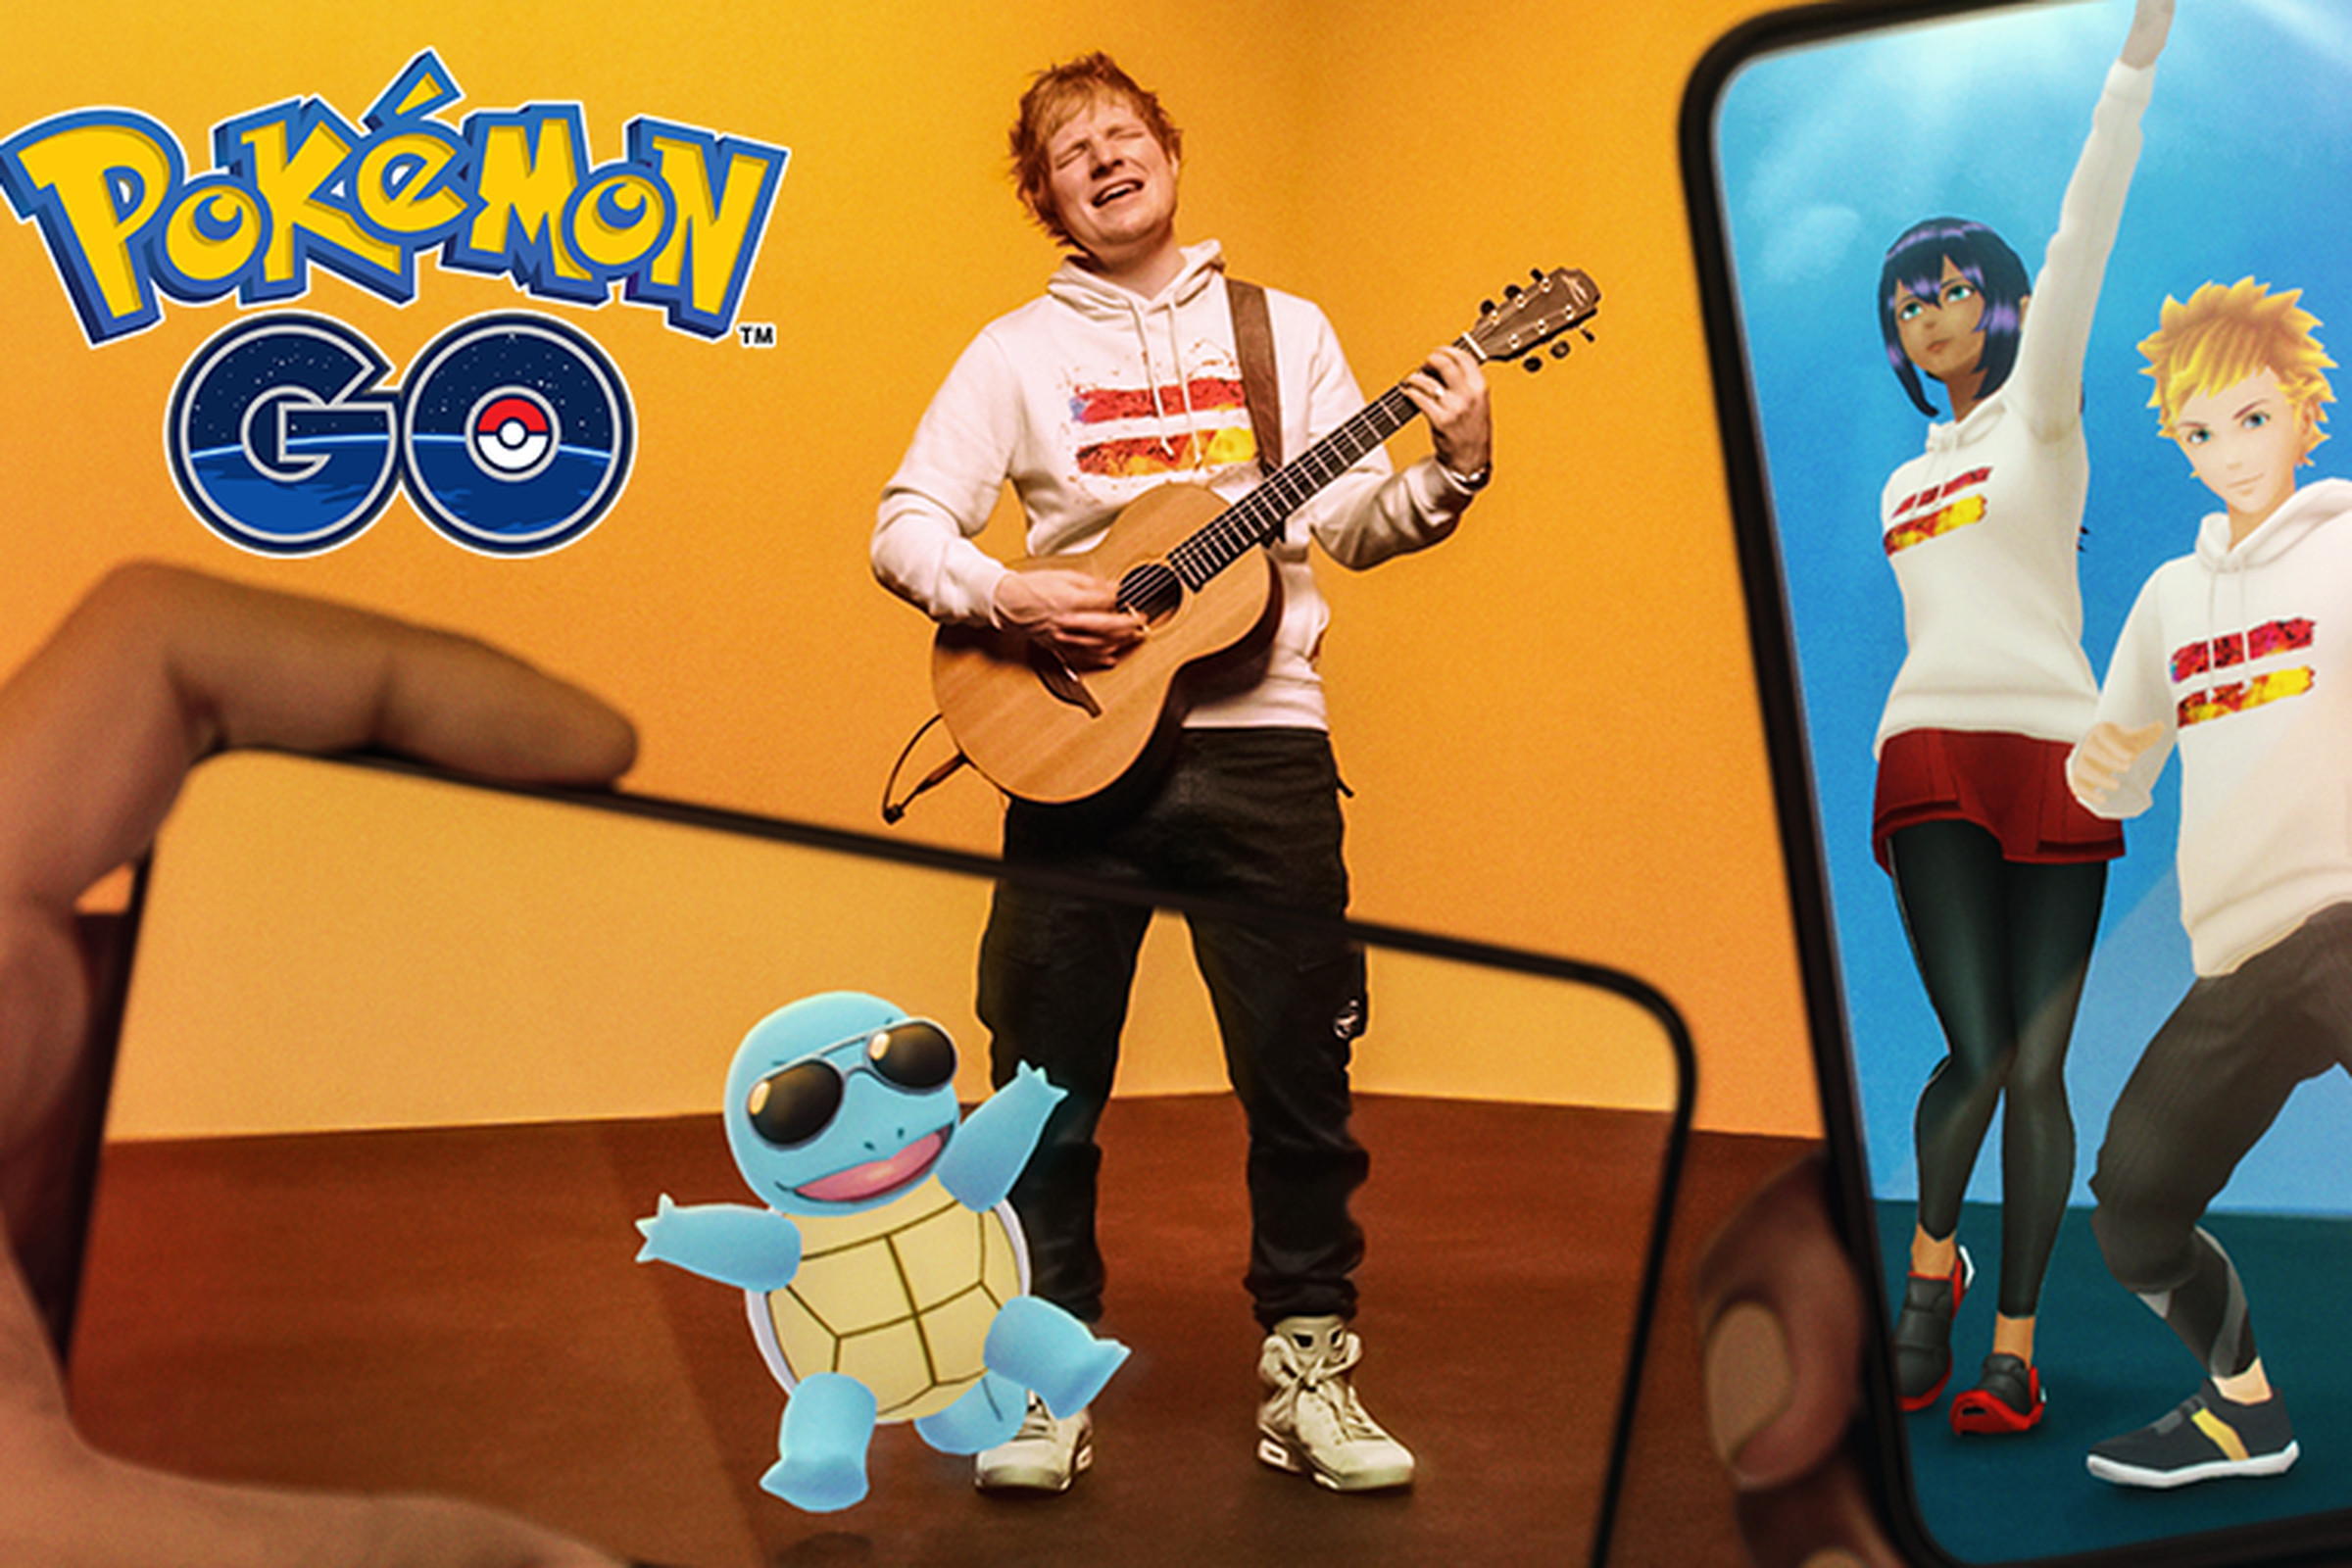 Ed Sheeran (right) serenades a Squirtle with sunglasses (left). 